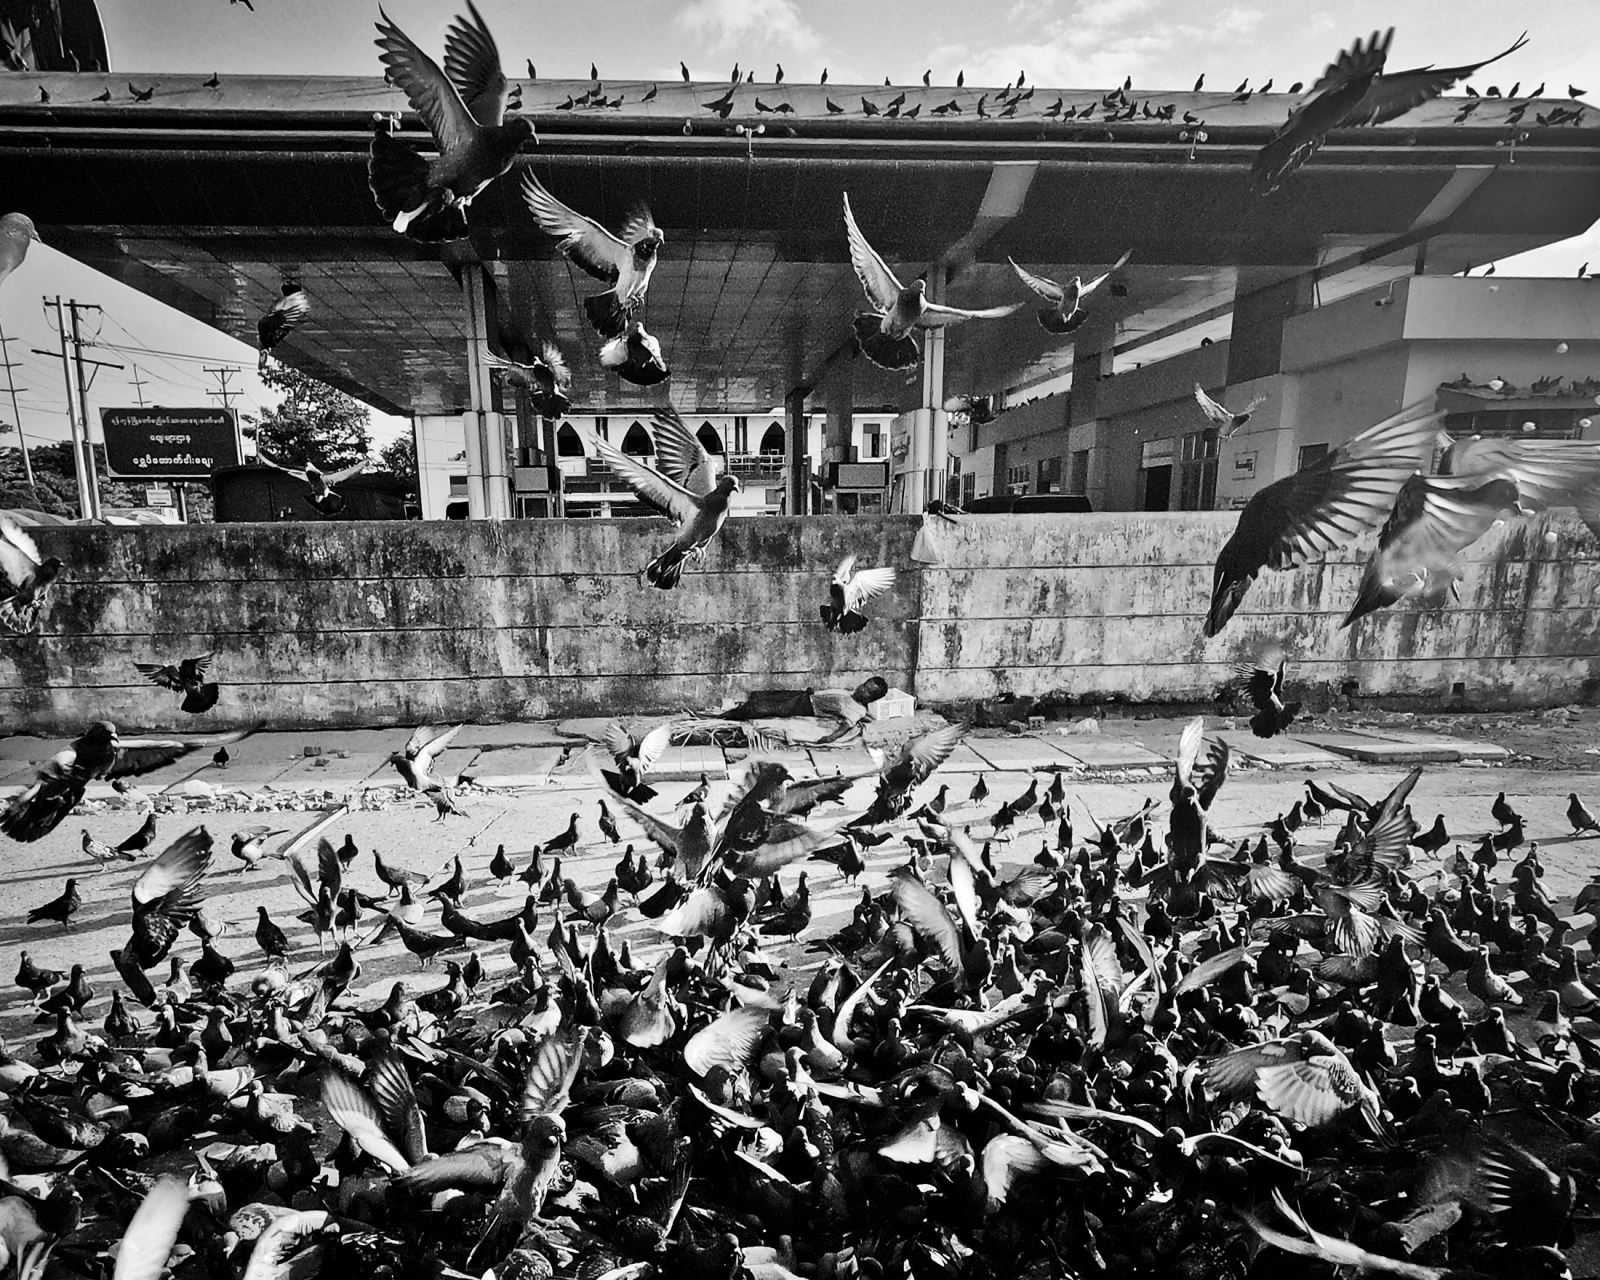 Pigeons and a homeless man in a suburb of Yangoon, Myanmar.